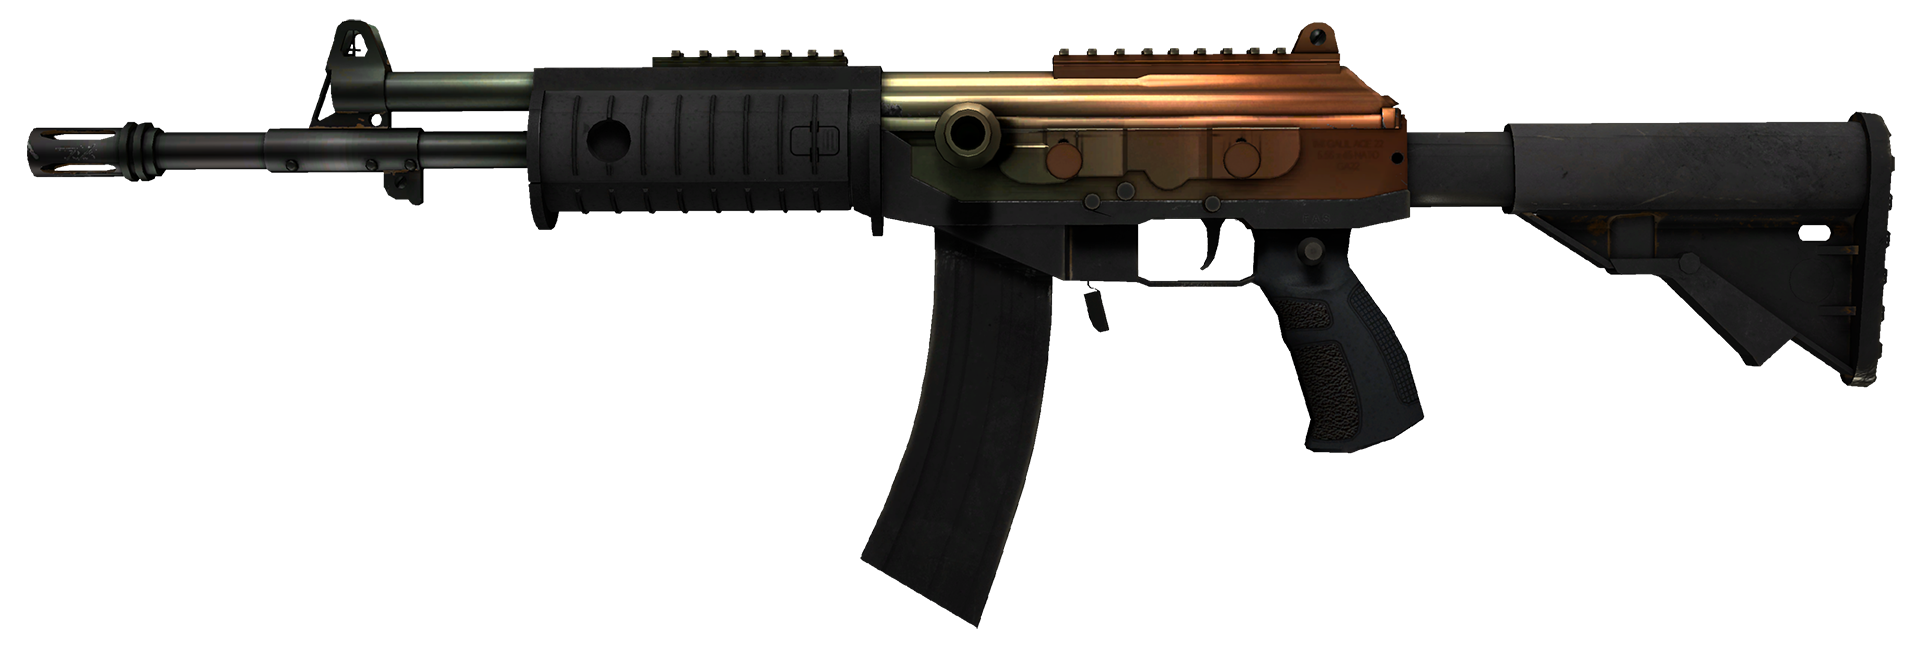 Galil AR Amber Fade Large Rendering